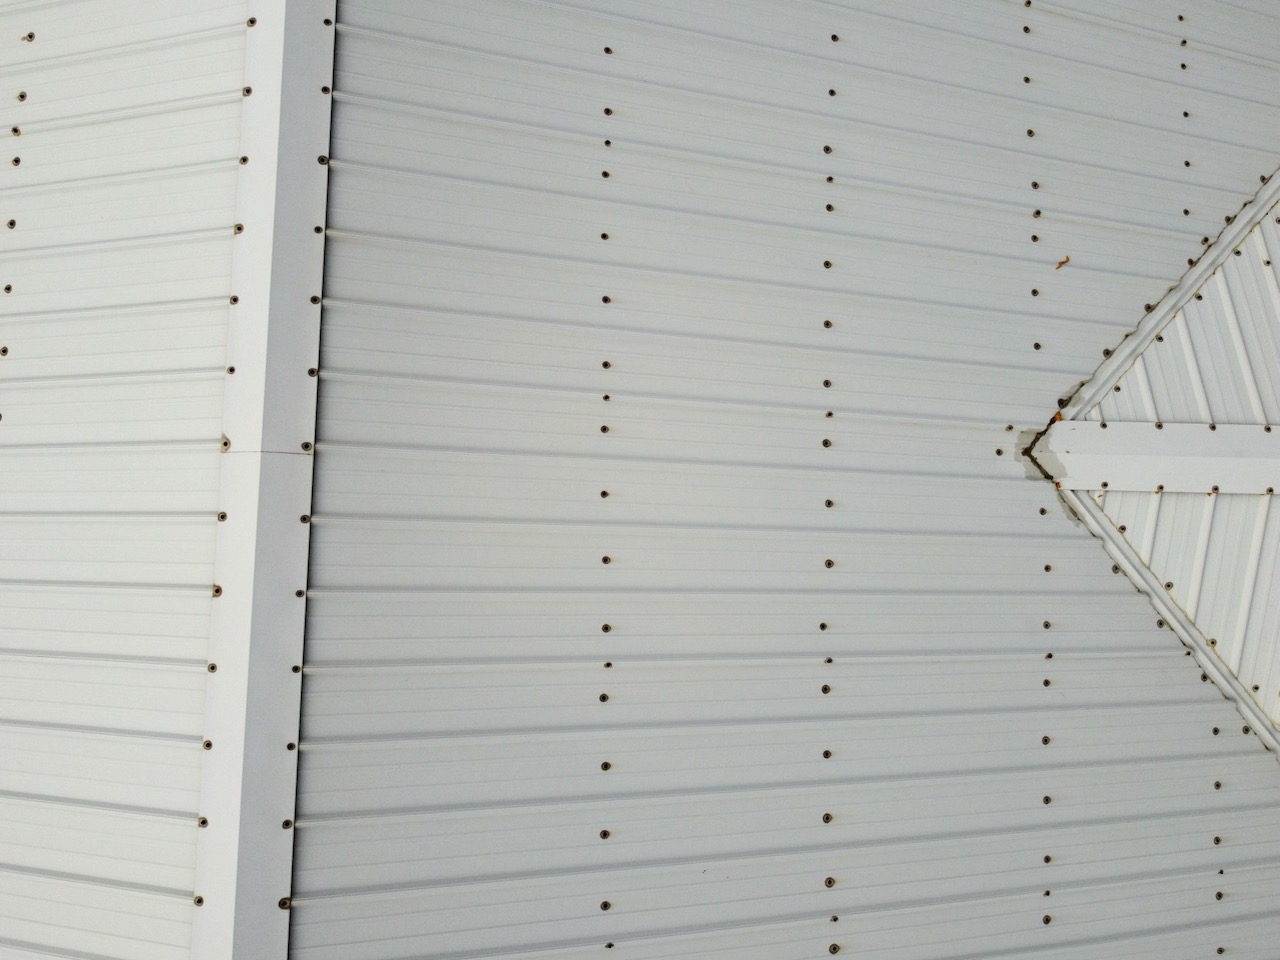 image of discolored fasteners on a metal roof